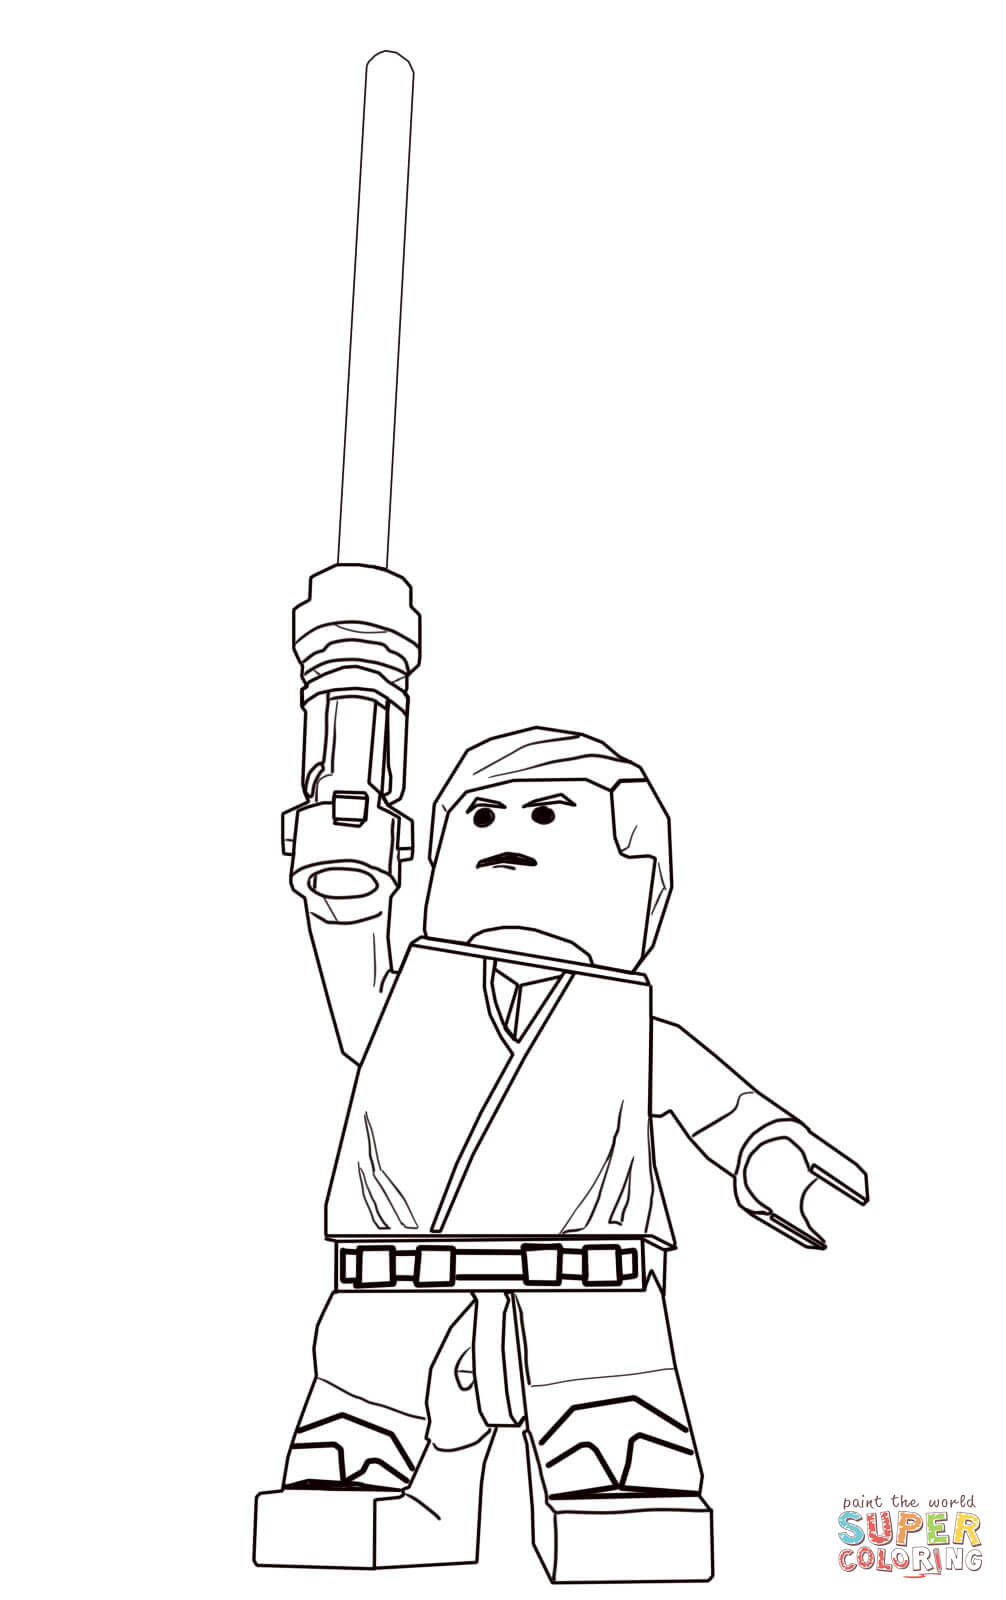 Lego star wars luke skywalker coloring page free printable coloring pages